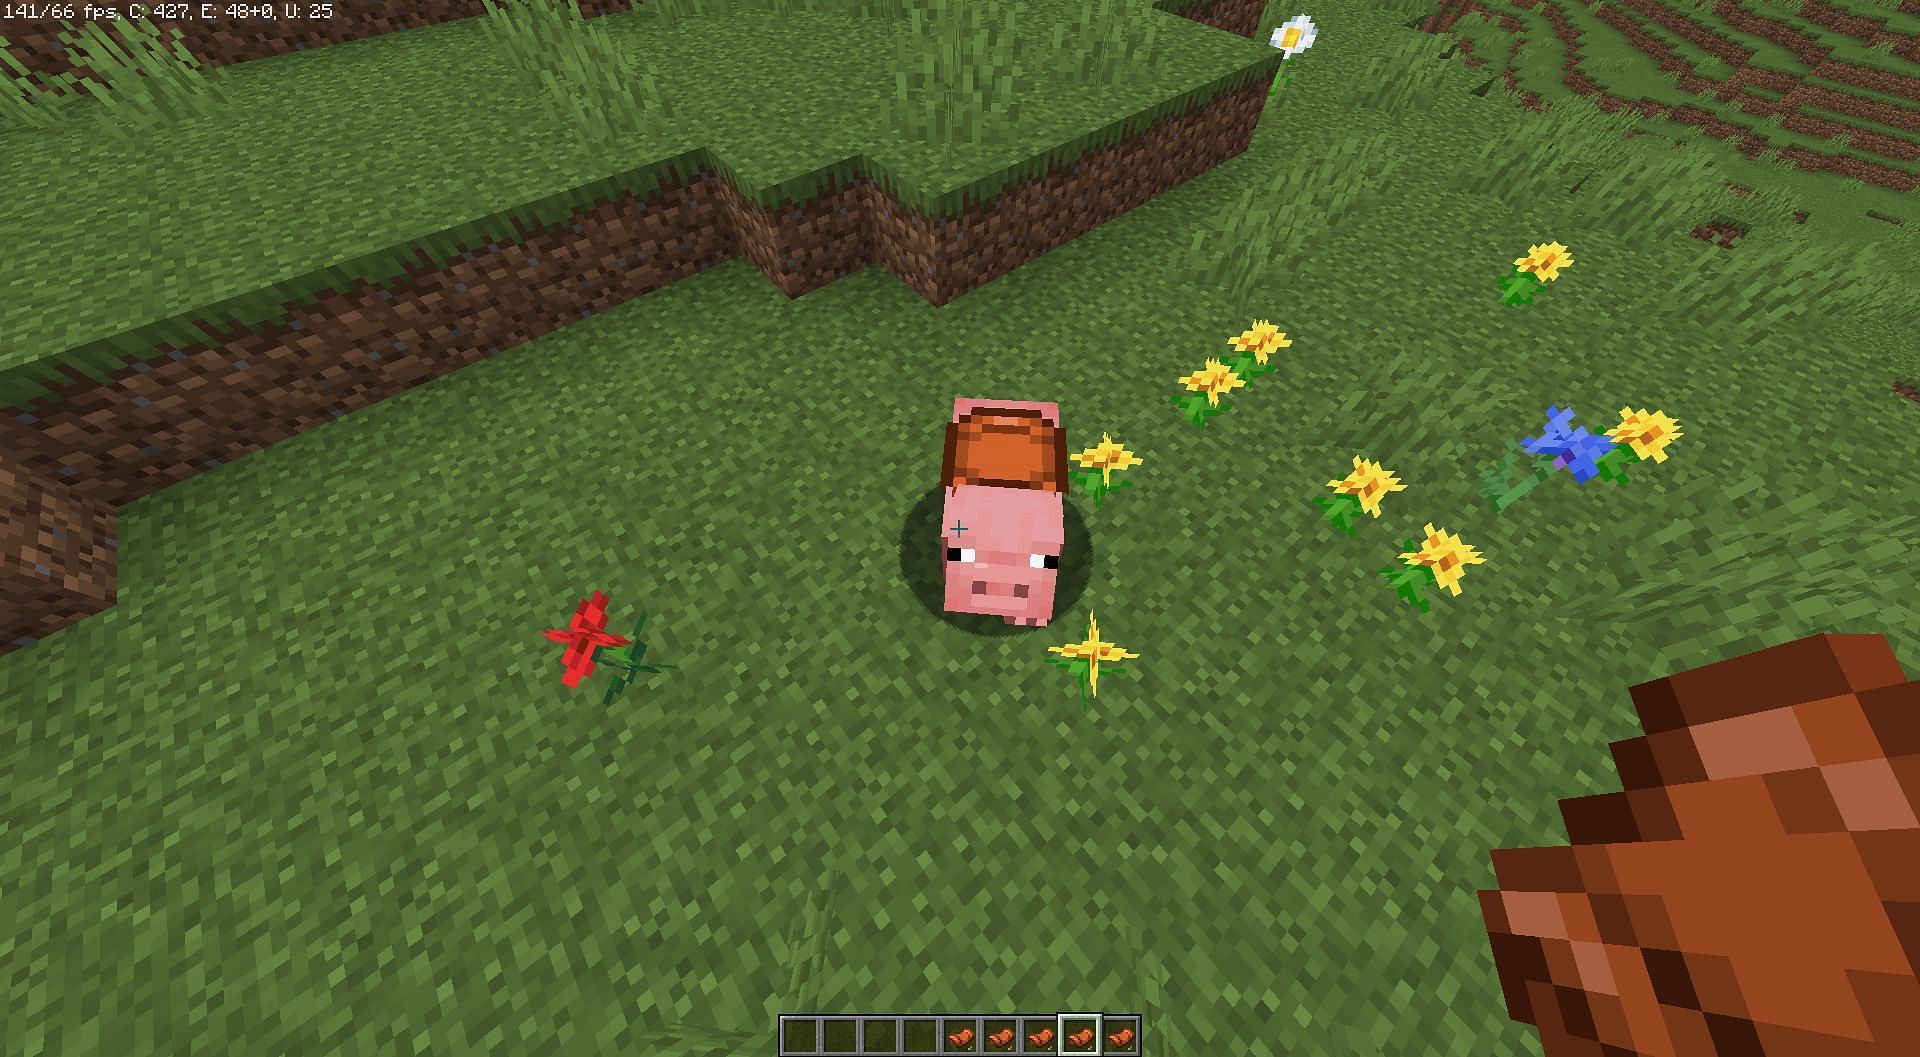 Pigs can be ridden (Image via Minecraft)